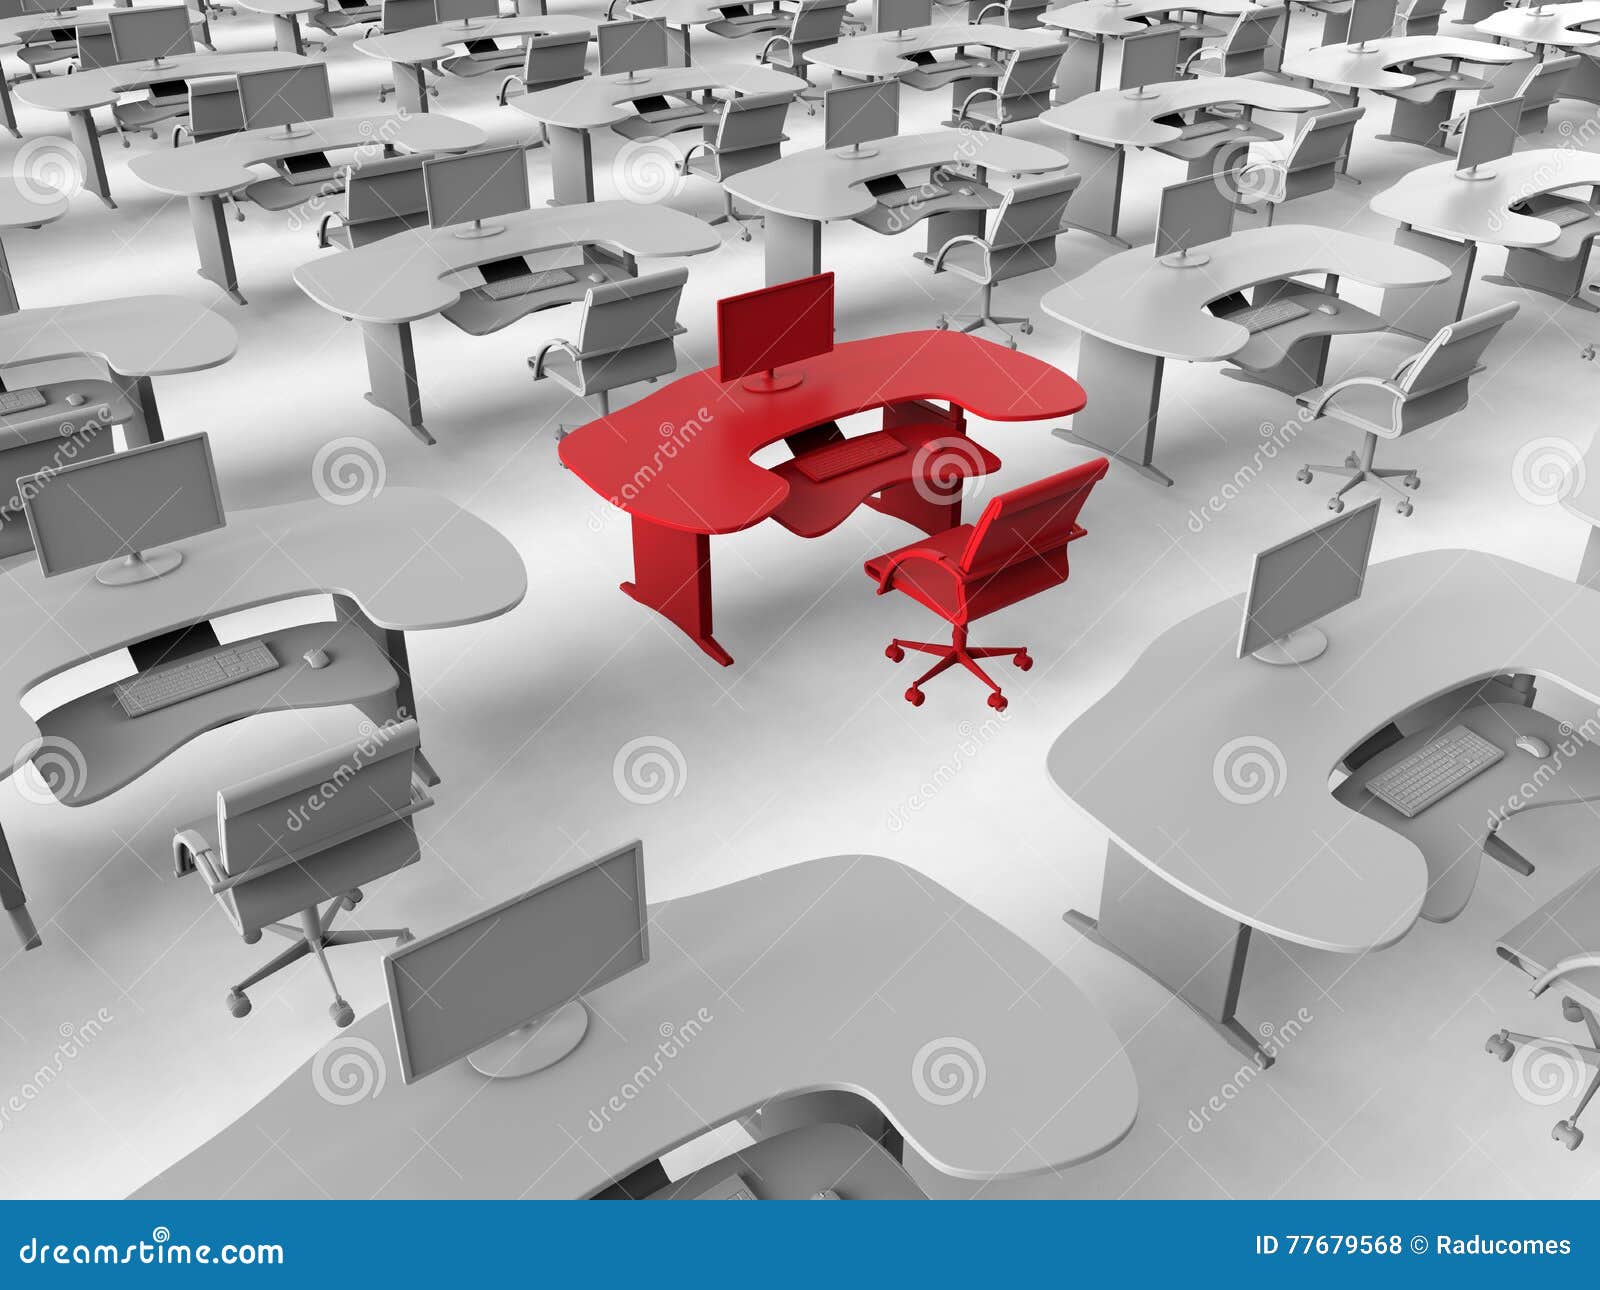 Office Work Space Target In Crowd Stock Illustration